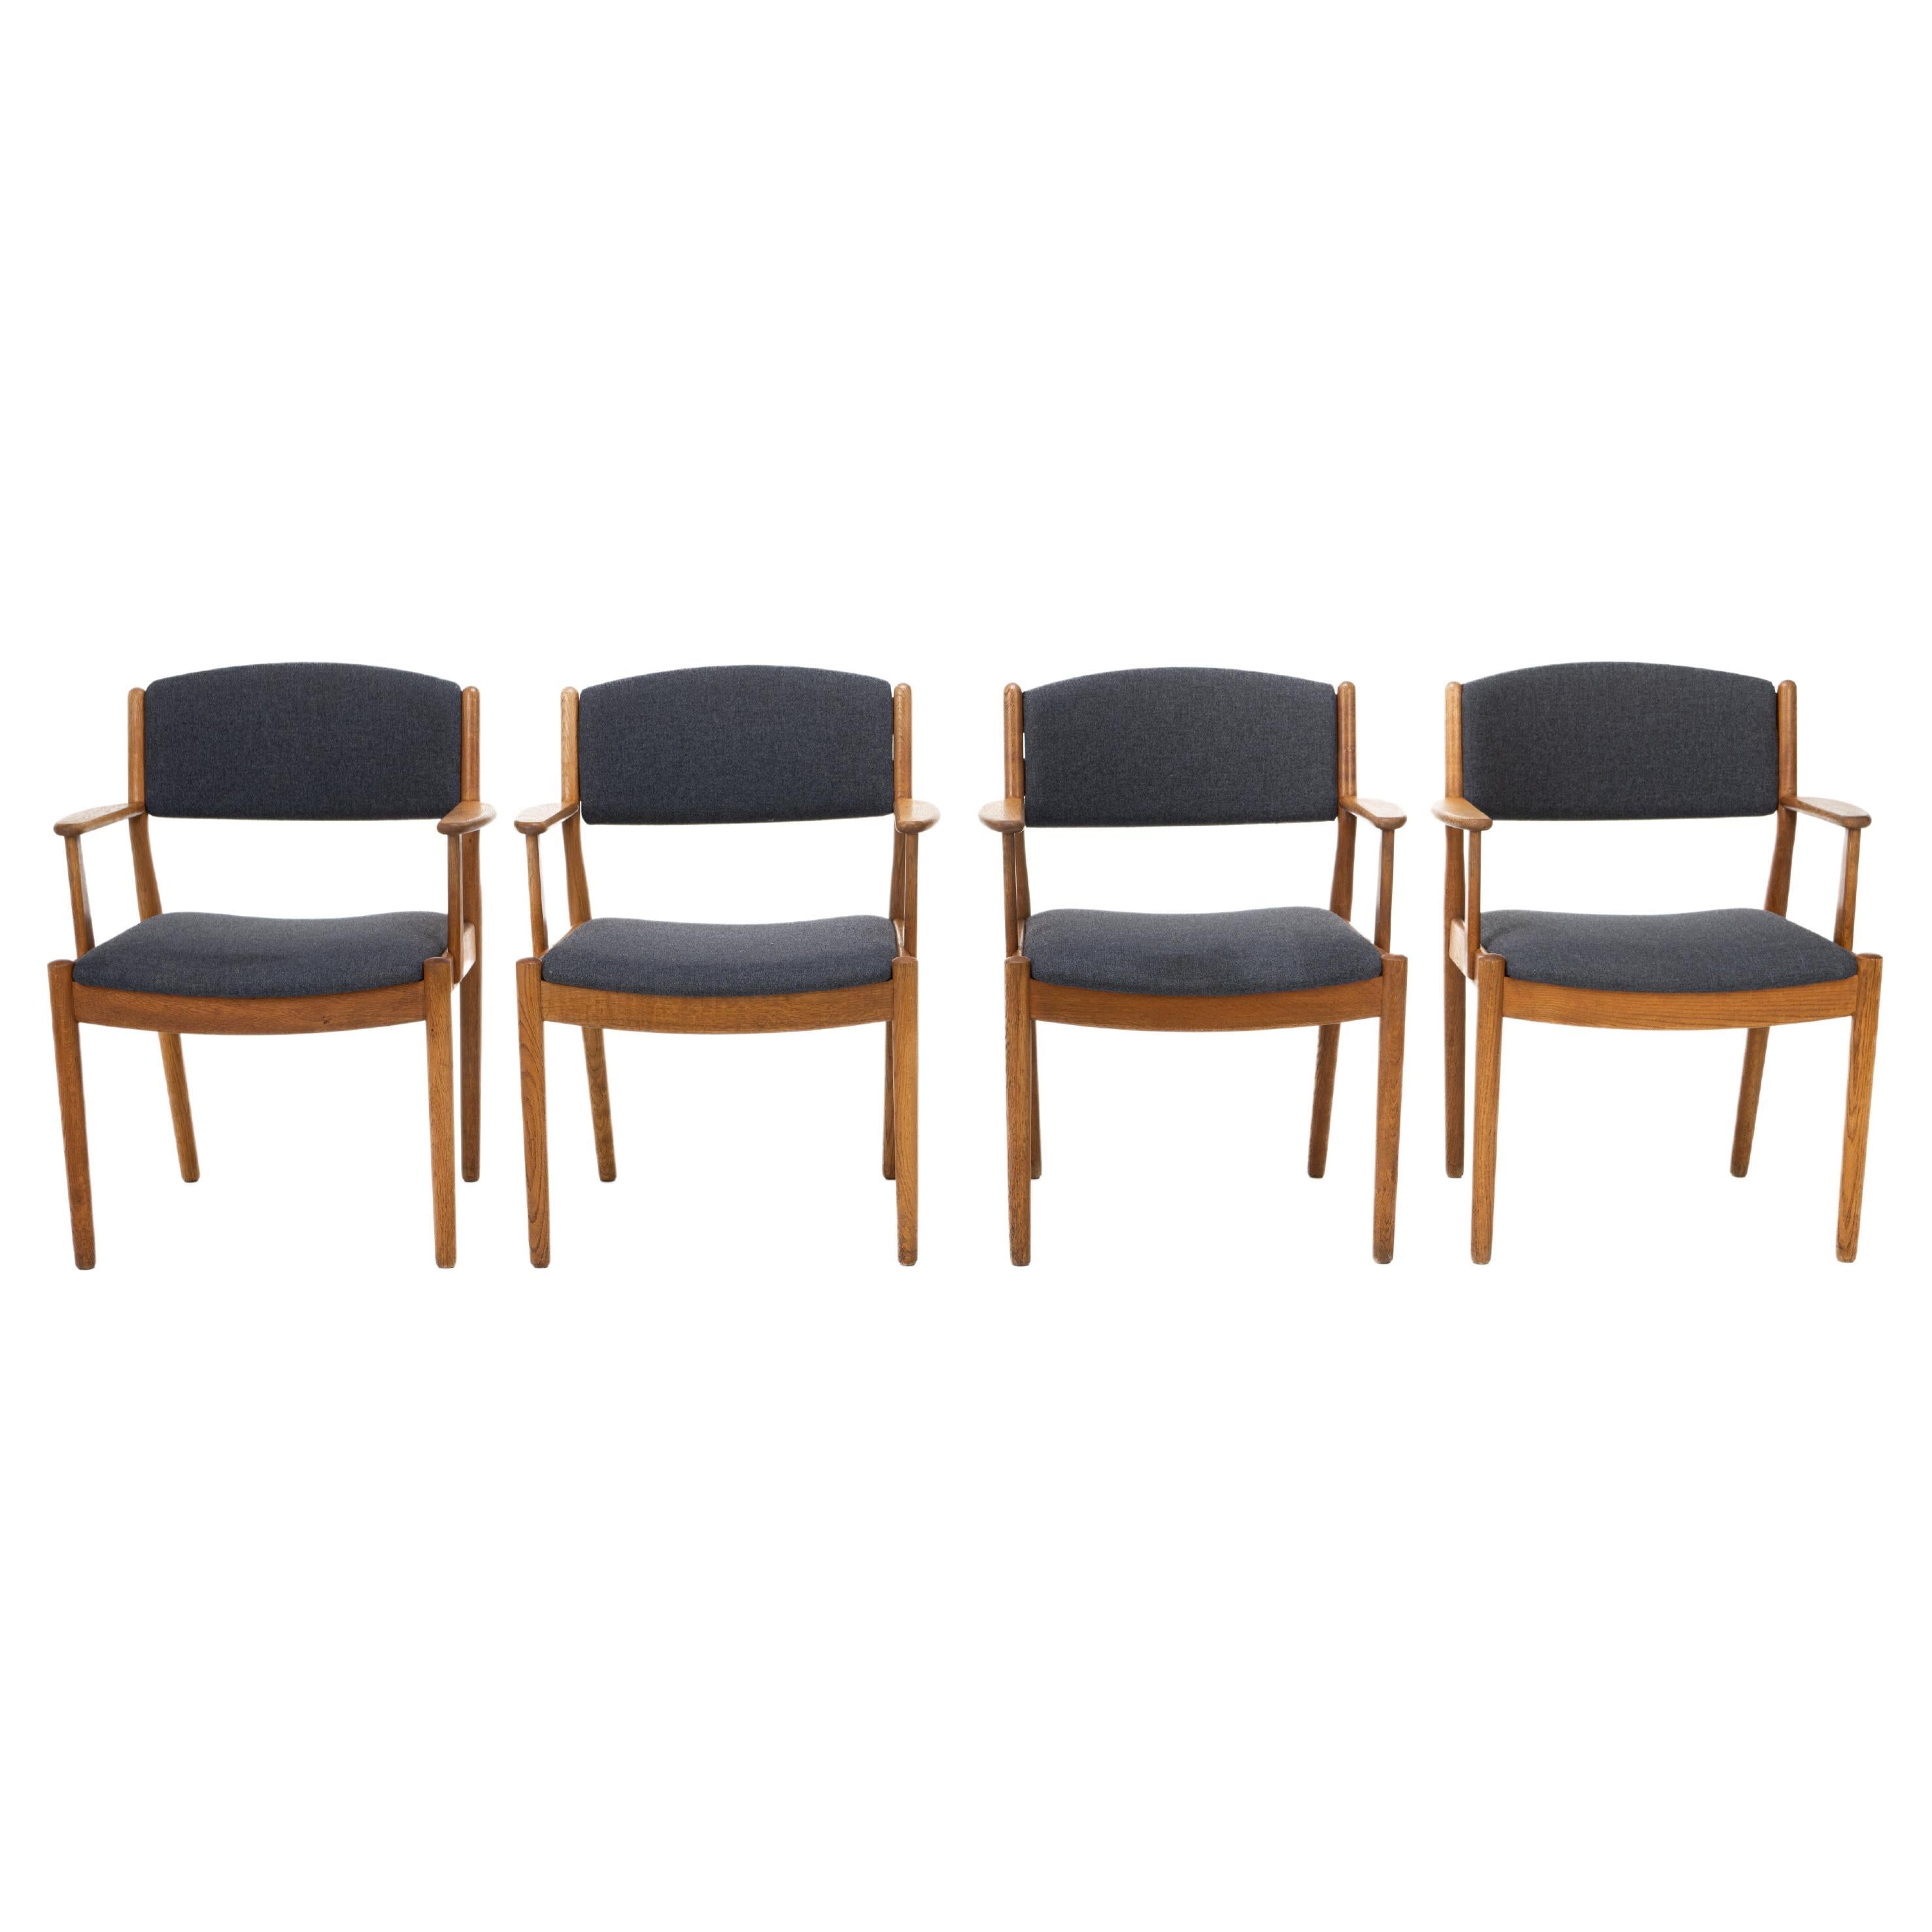 Danish Dining Chairs with Armrests by Poul Volther for FDB Møbler, Denmark, 1960 For Sale